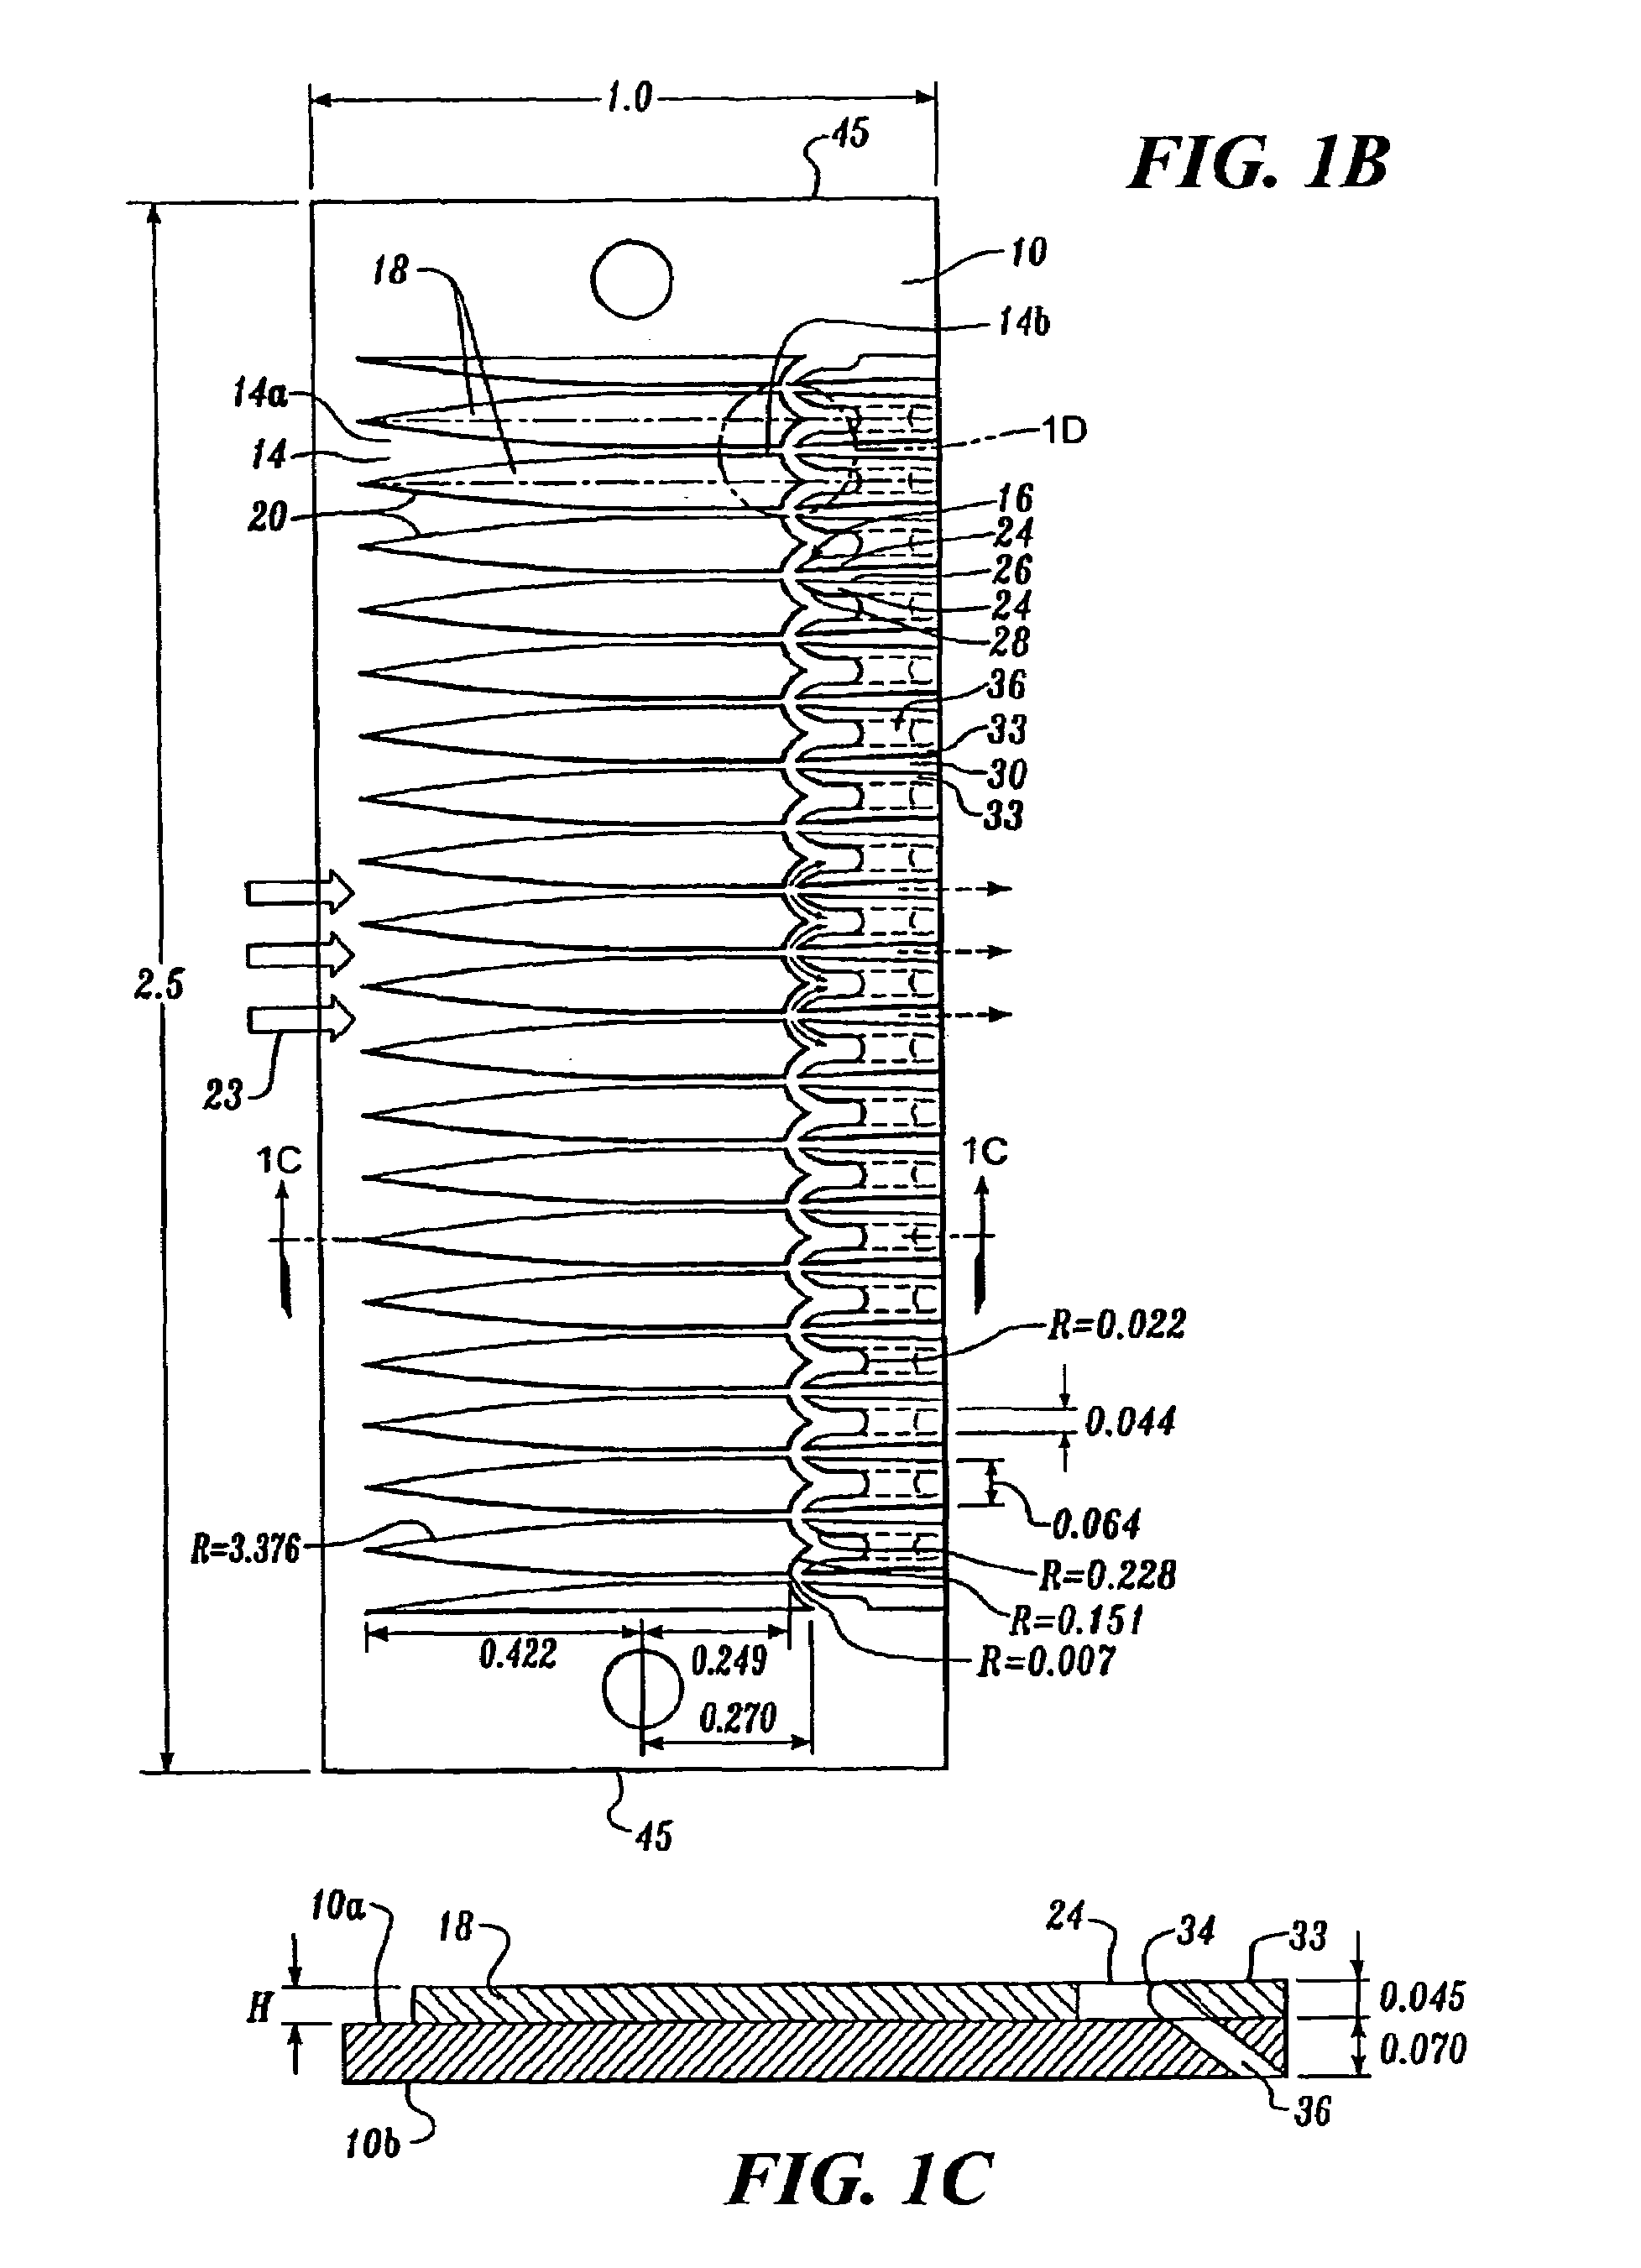 Devices for continuous sampling of airborne particles using a regenerative surface